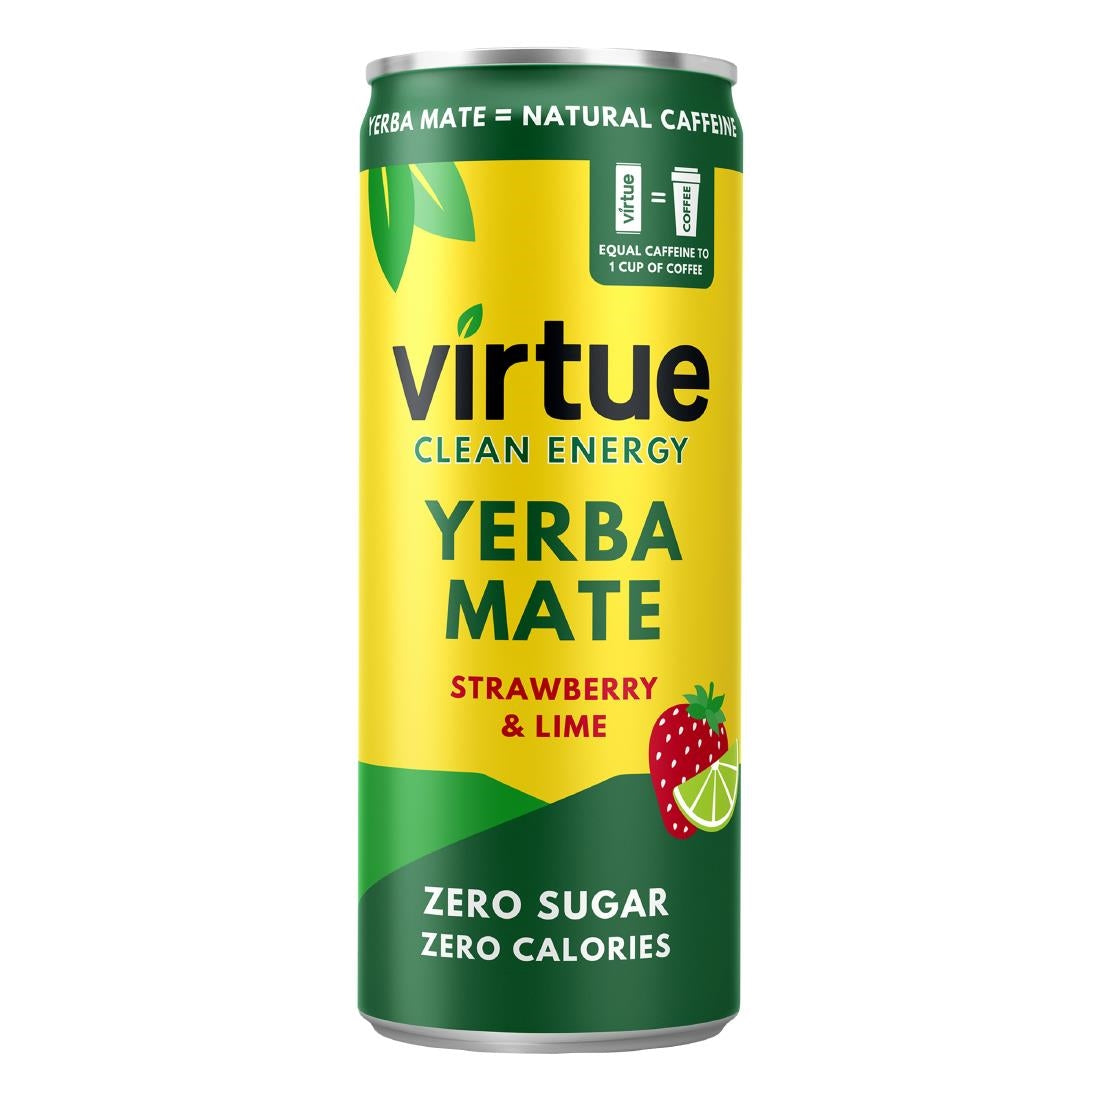 HS866 Virtue Yerba Mate - Strawberry & Lime 250ml (Pack of 12)